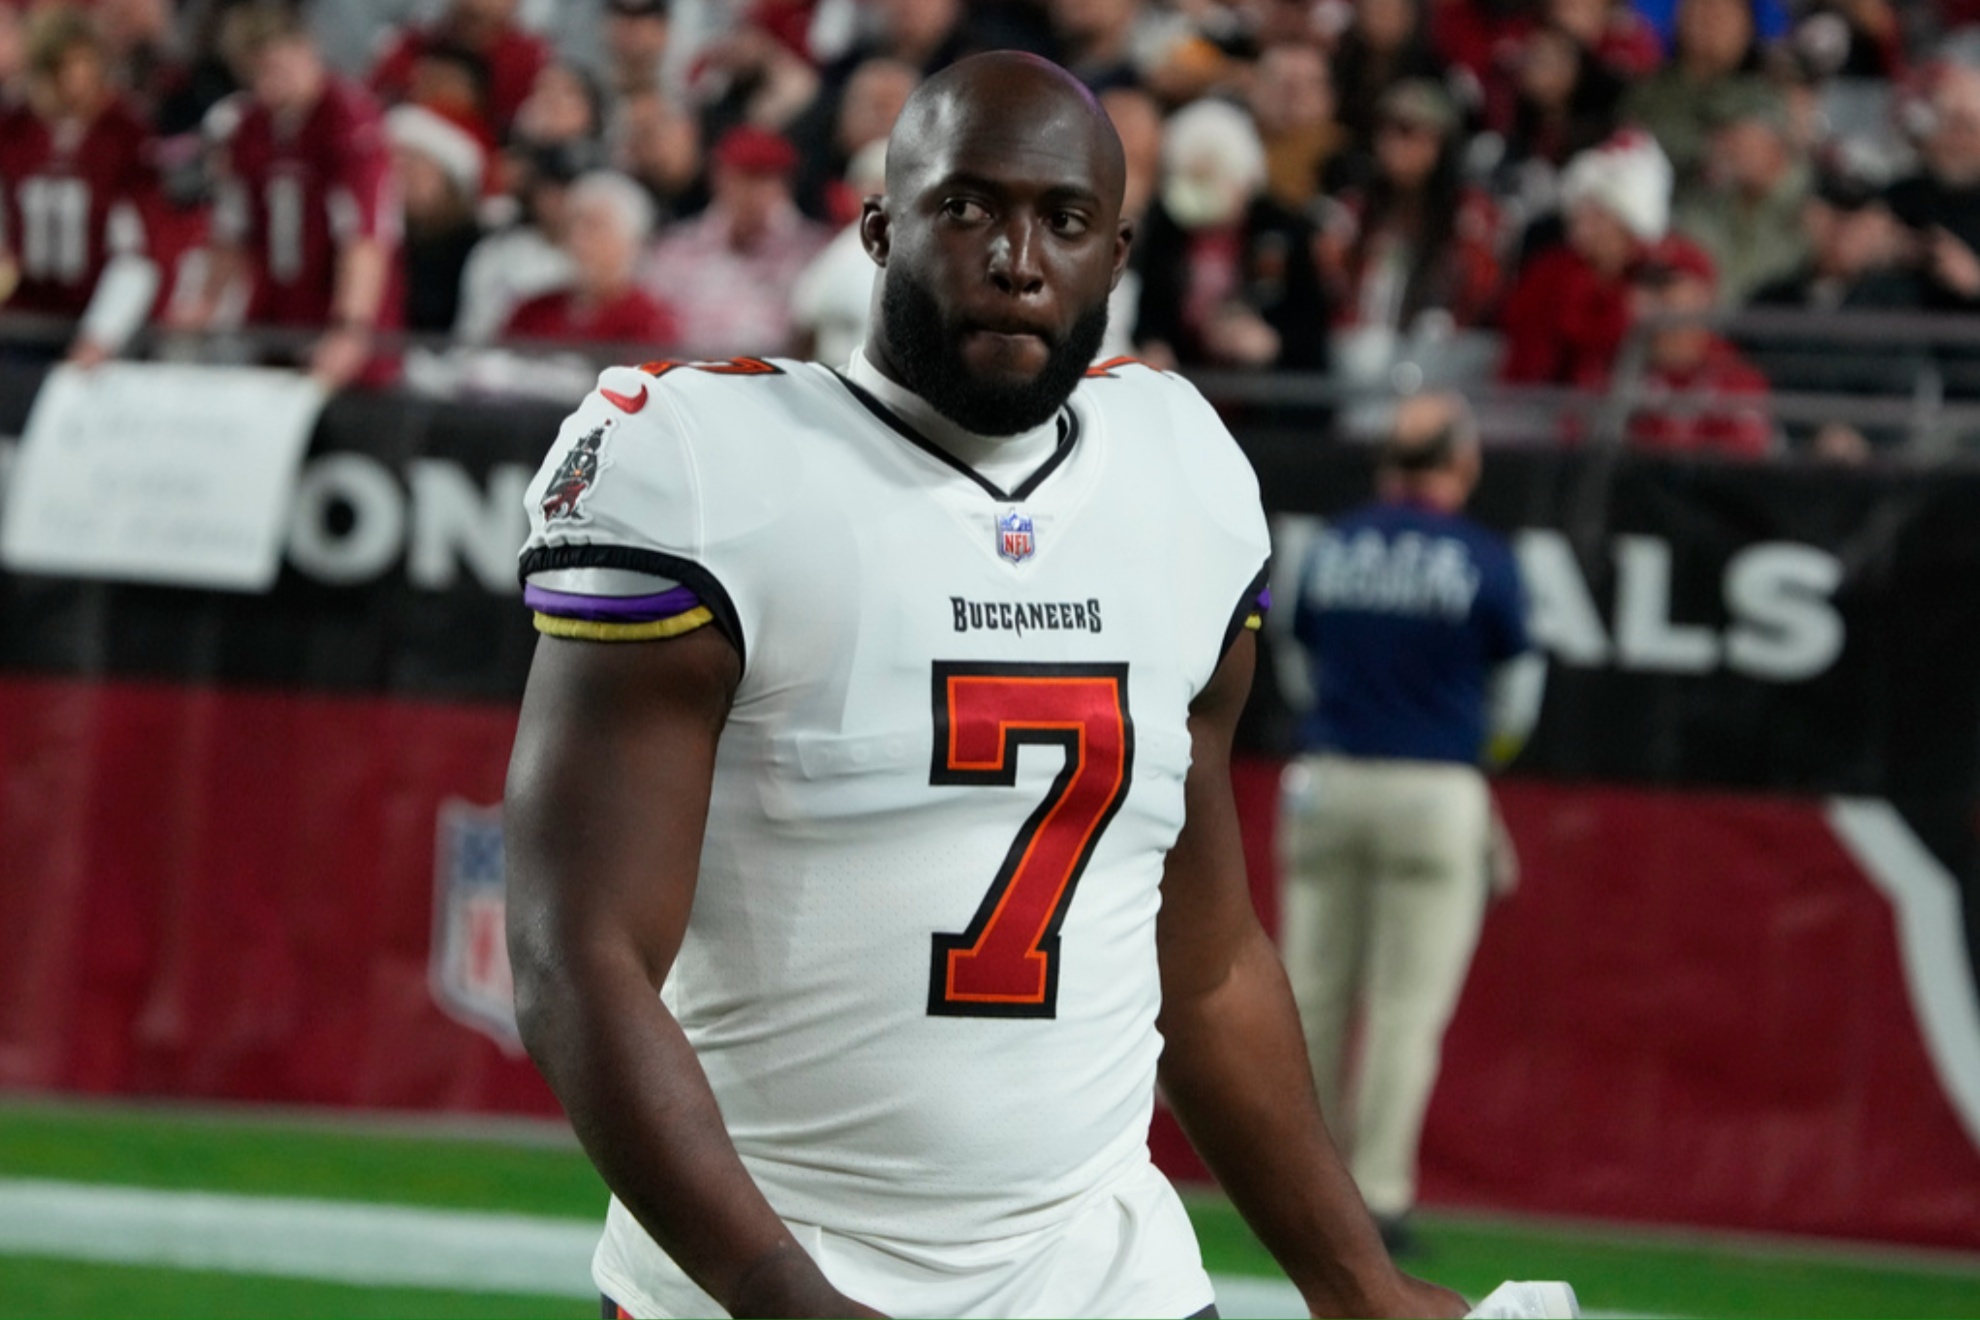 Leonard Fournette was released from the Buccaneers in March